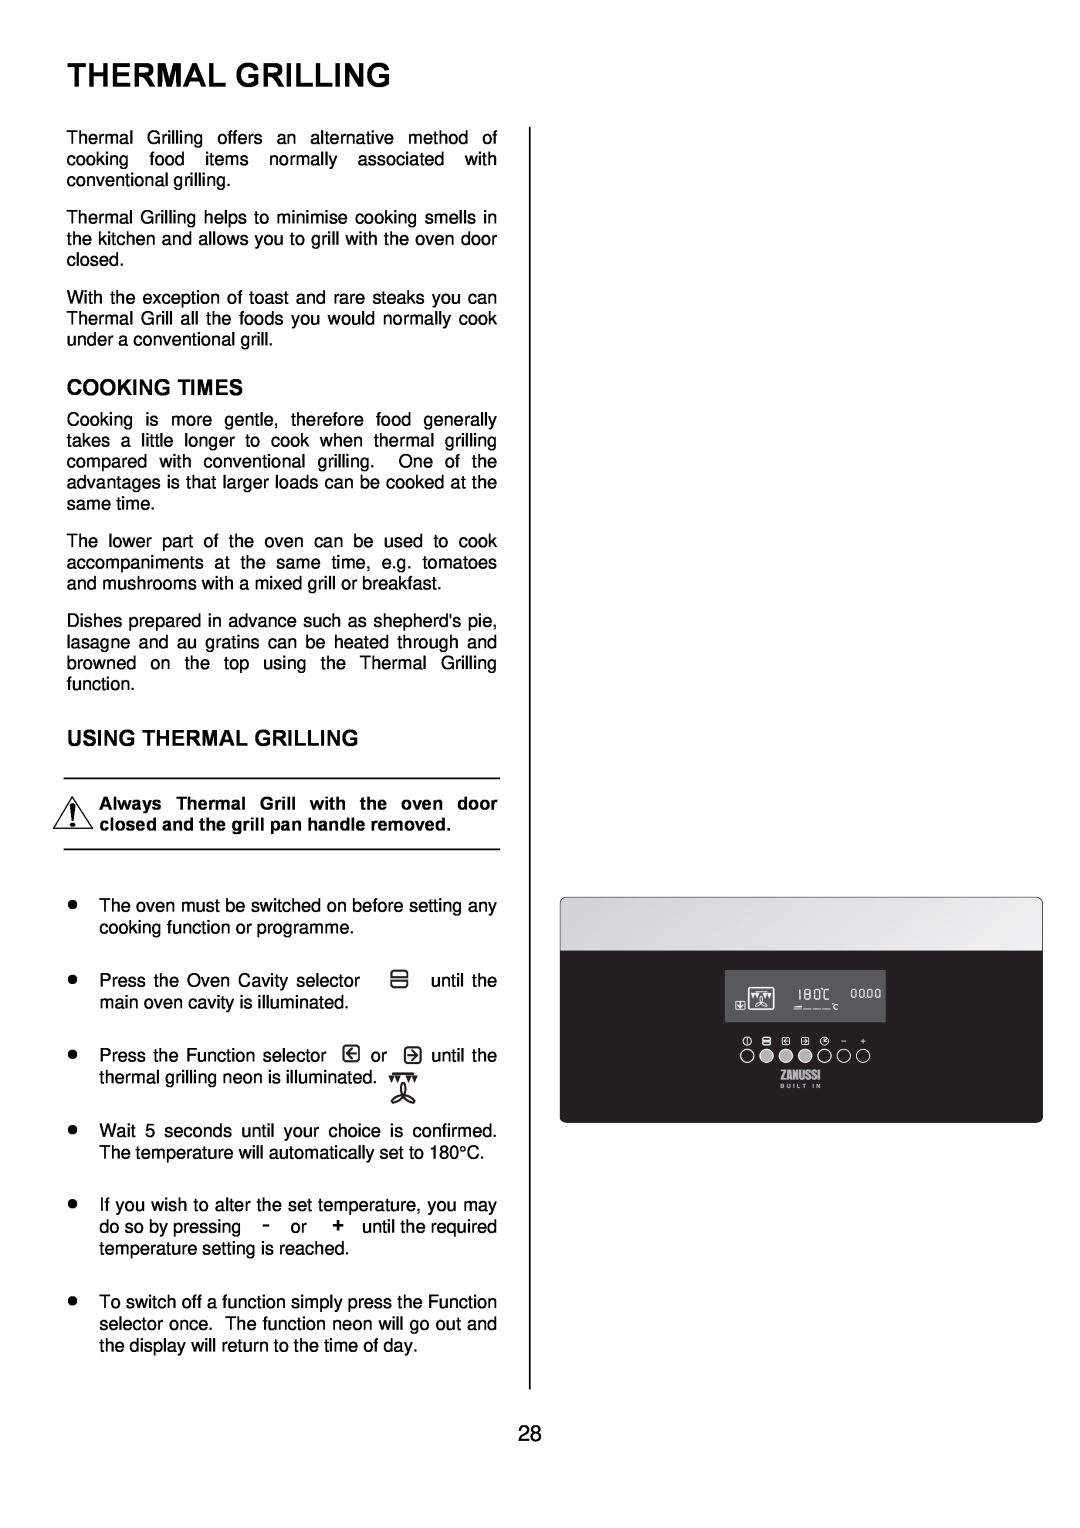 Zanussi ZDQ 995 manual Cooking Times, Using Thermal Grilling 